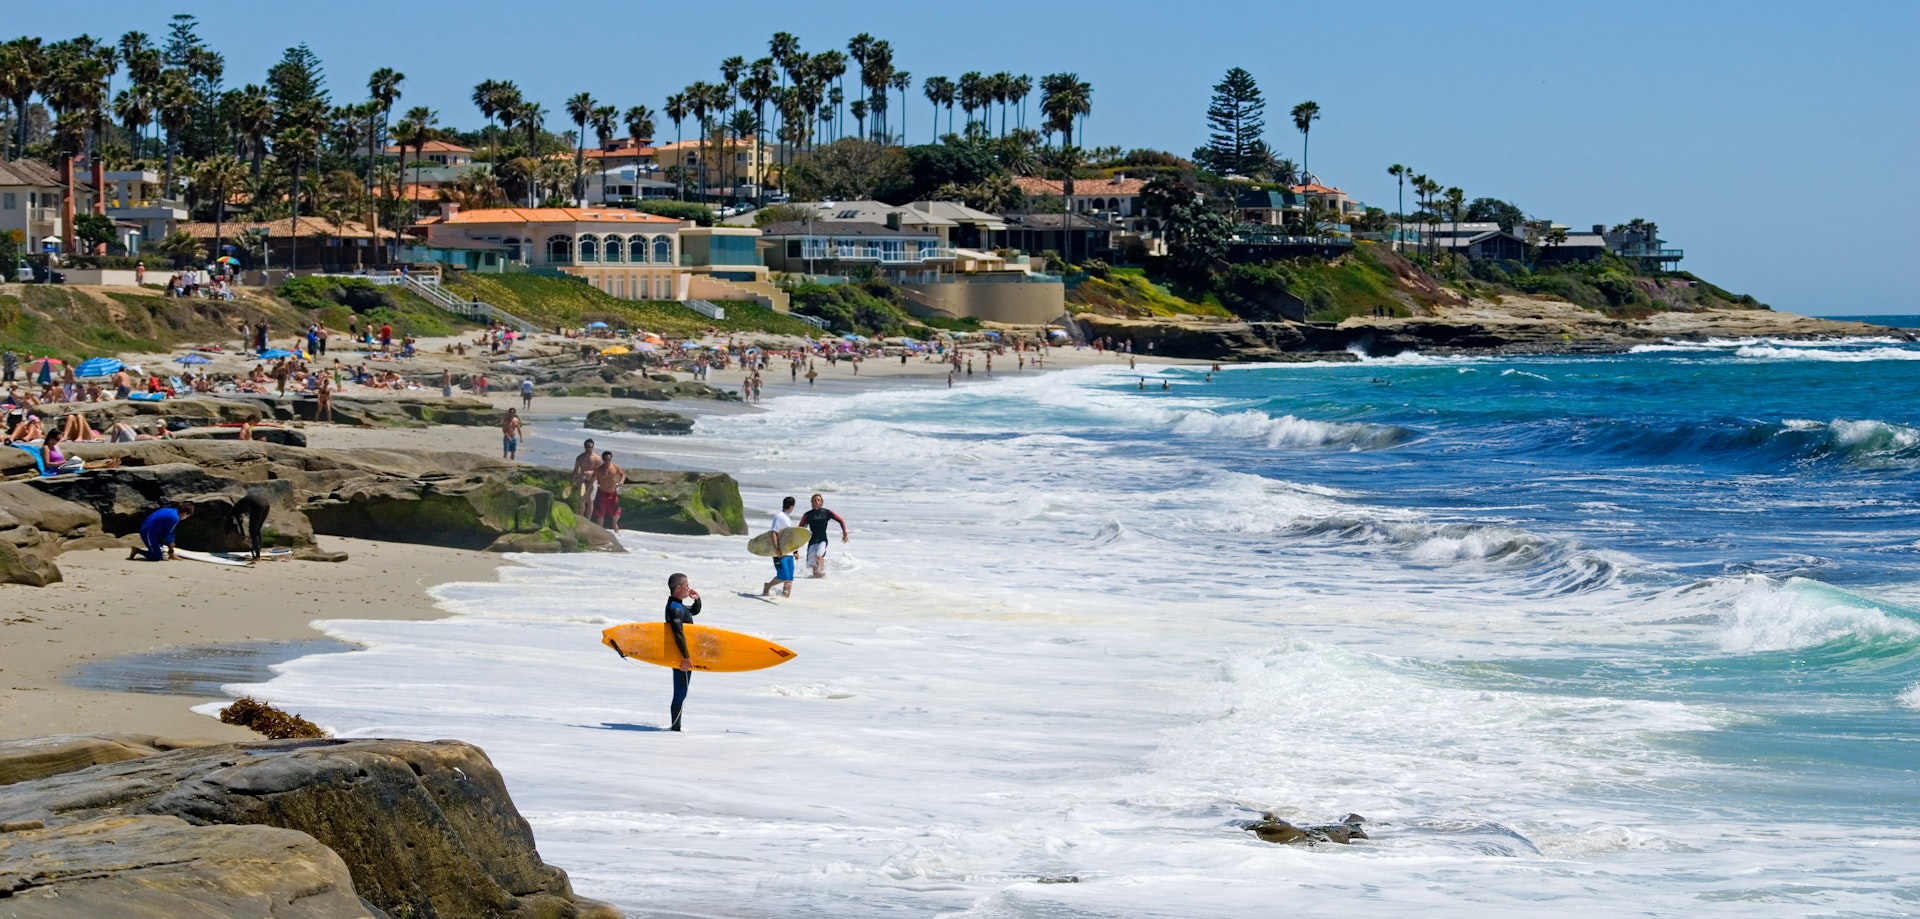 A surfer holding an orange board surveys the waves from the shore. The beach is busy with people.